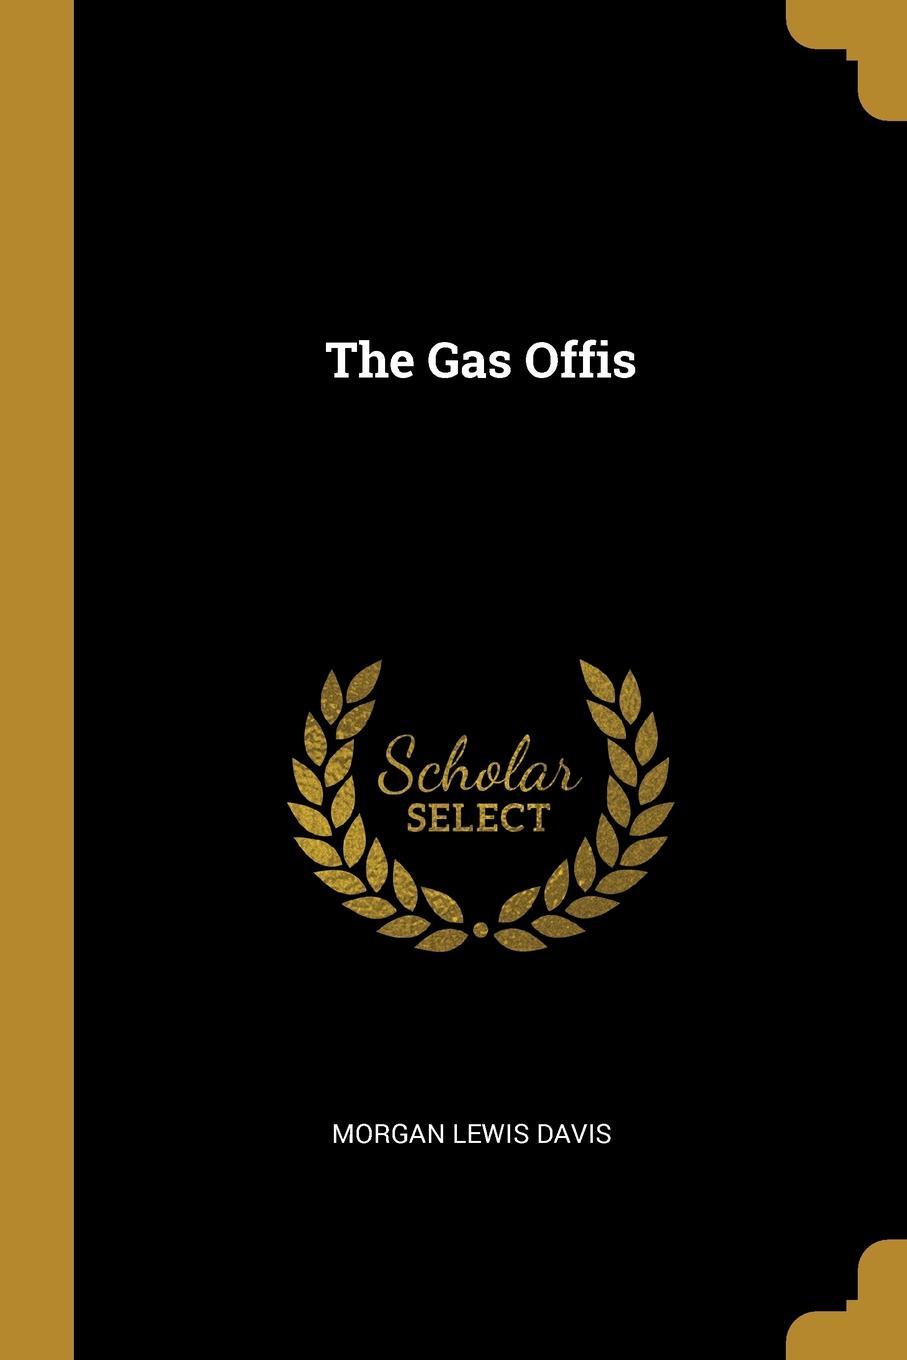 The Gas Offis